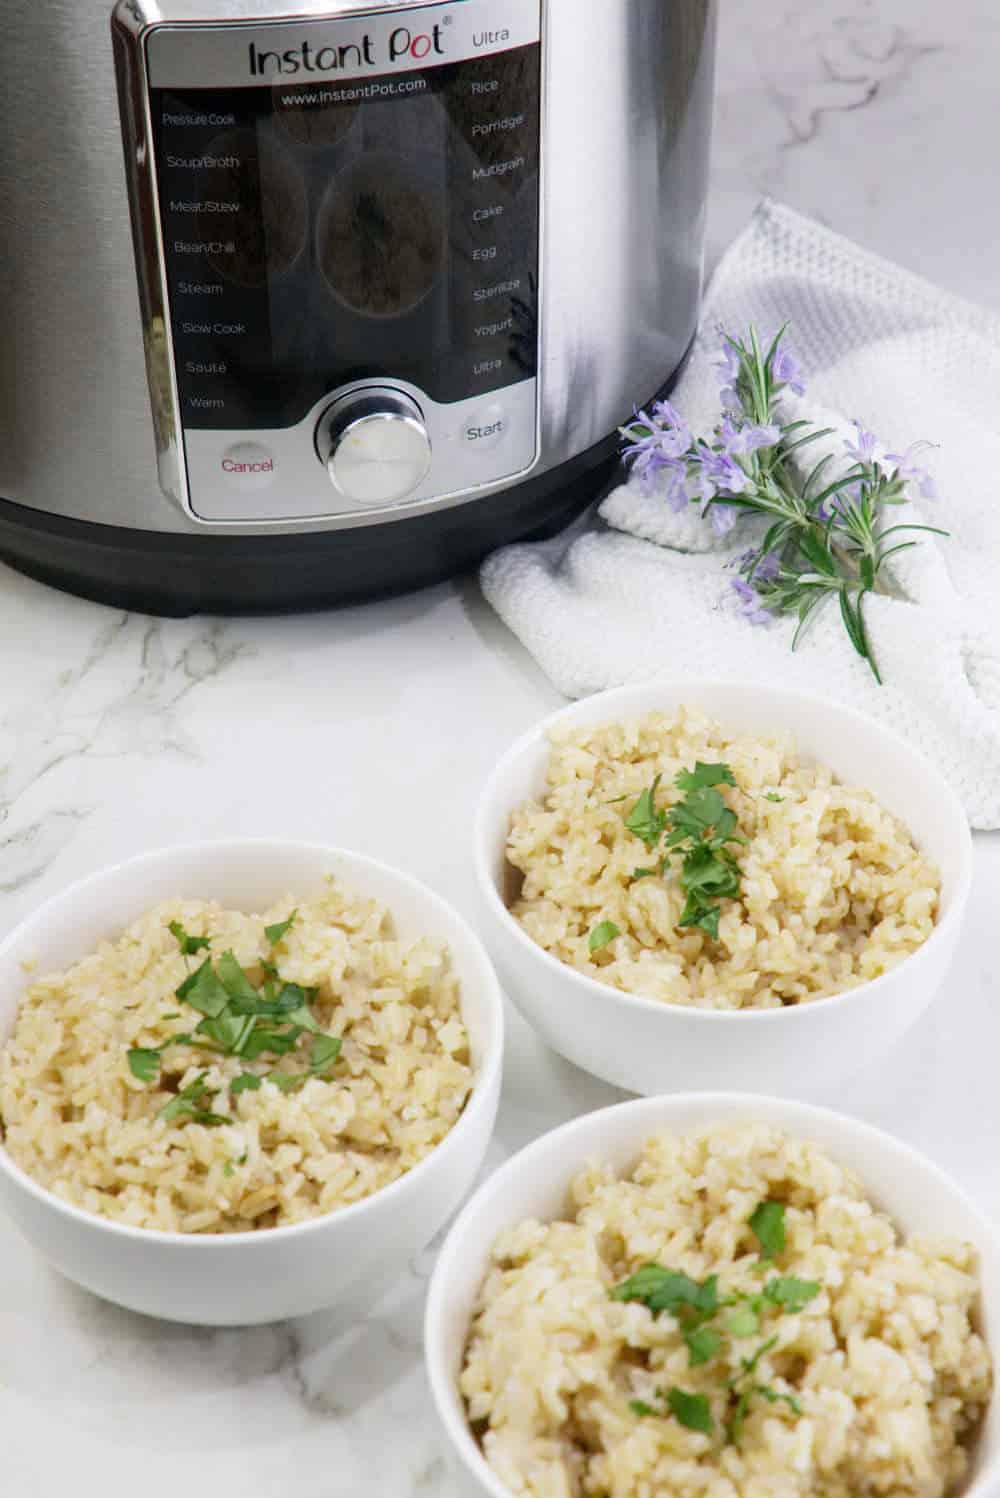 https://savorthebest.com/wp-content/uploads/2018/05/instant-pot-sprouted-brown-rice_0590.jpg